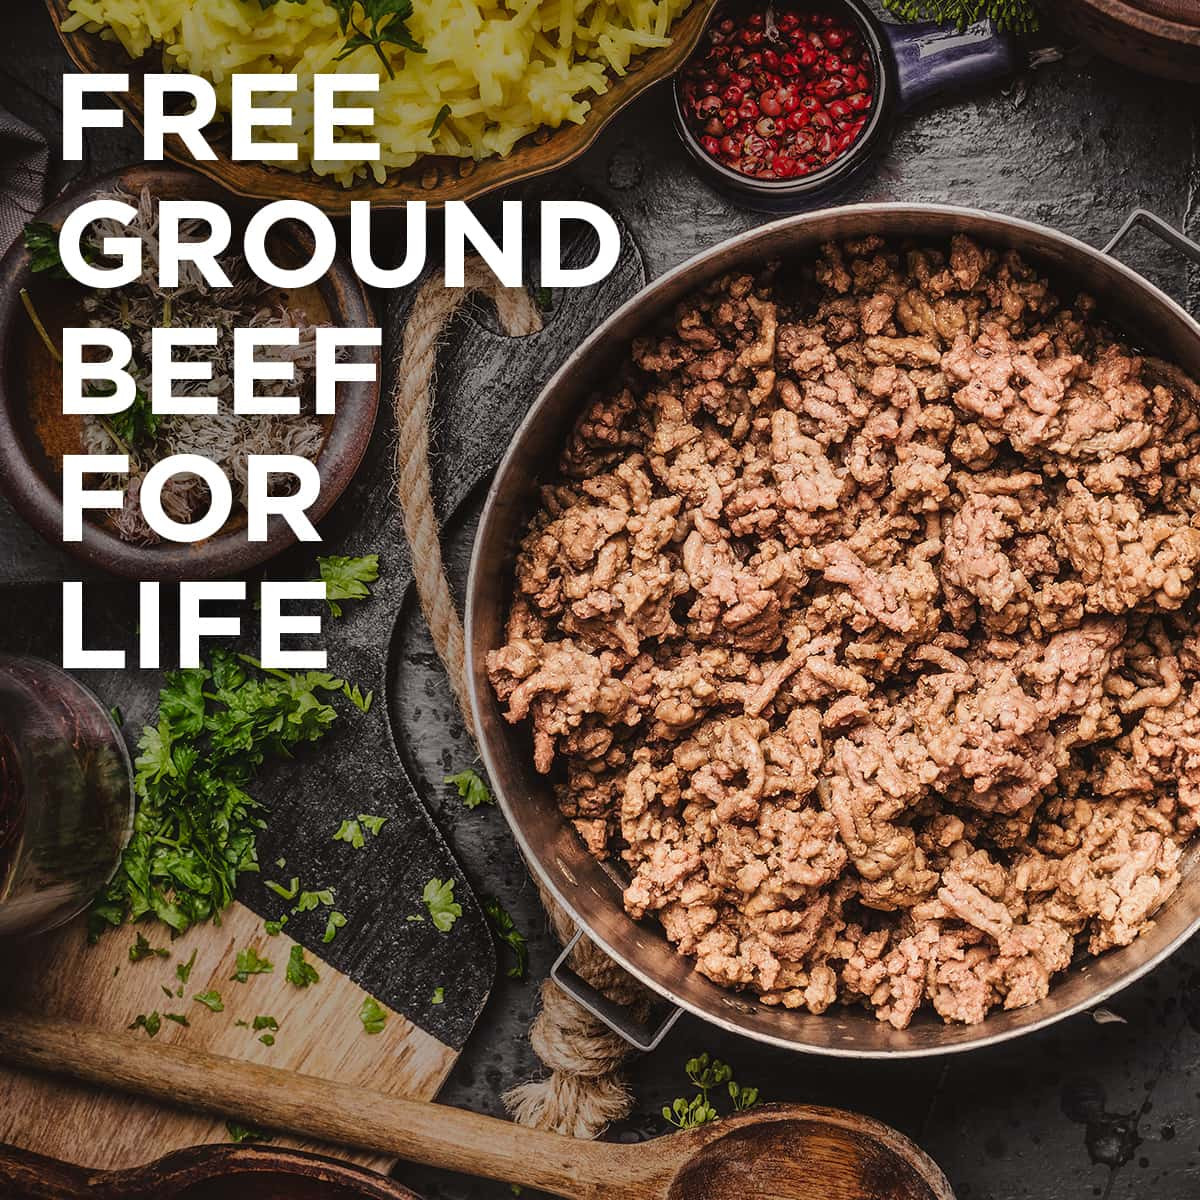 Ground Beef Sale
 ButcherBox Sale FREE Ground Beef FOR LIFE hello